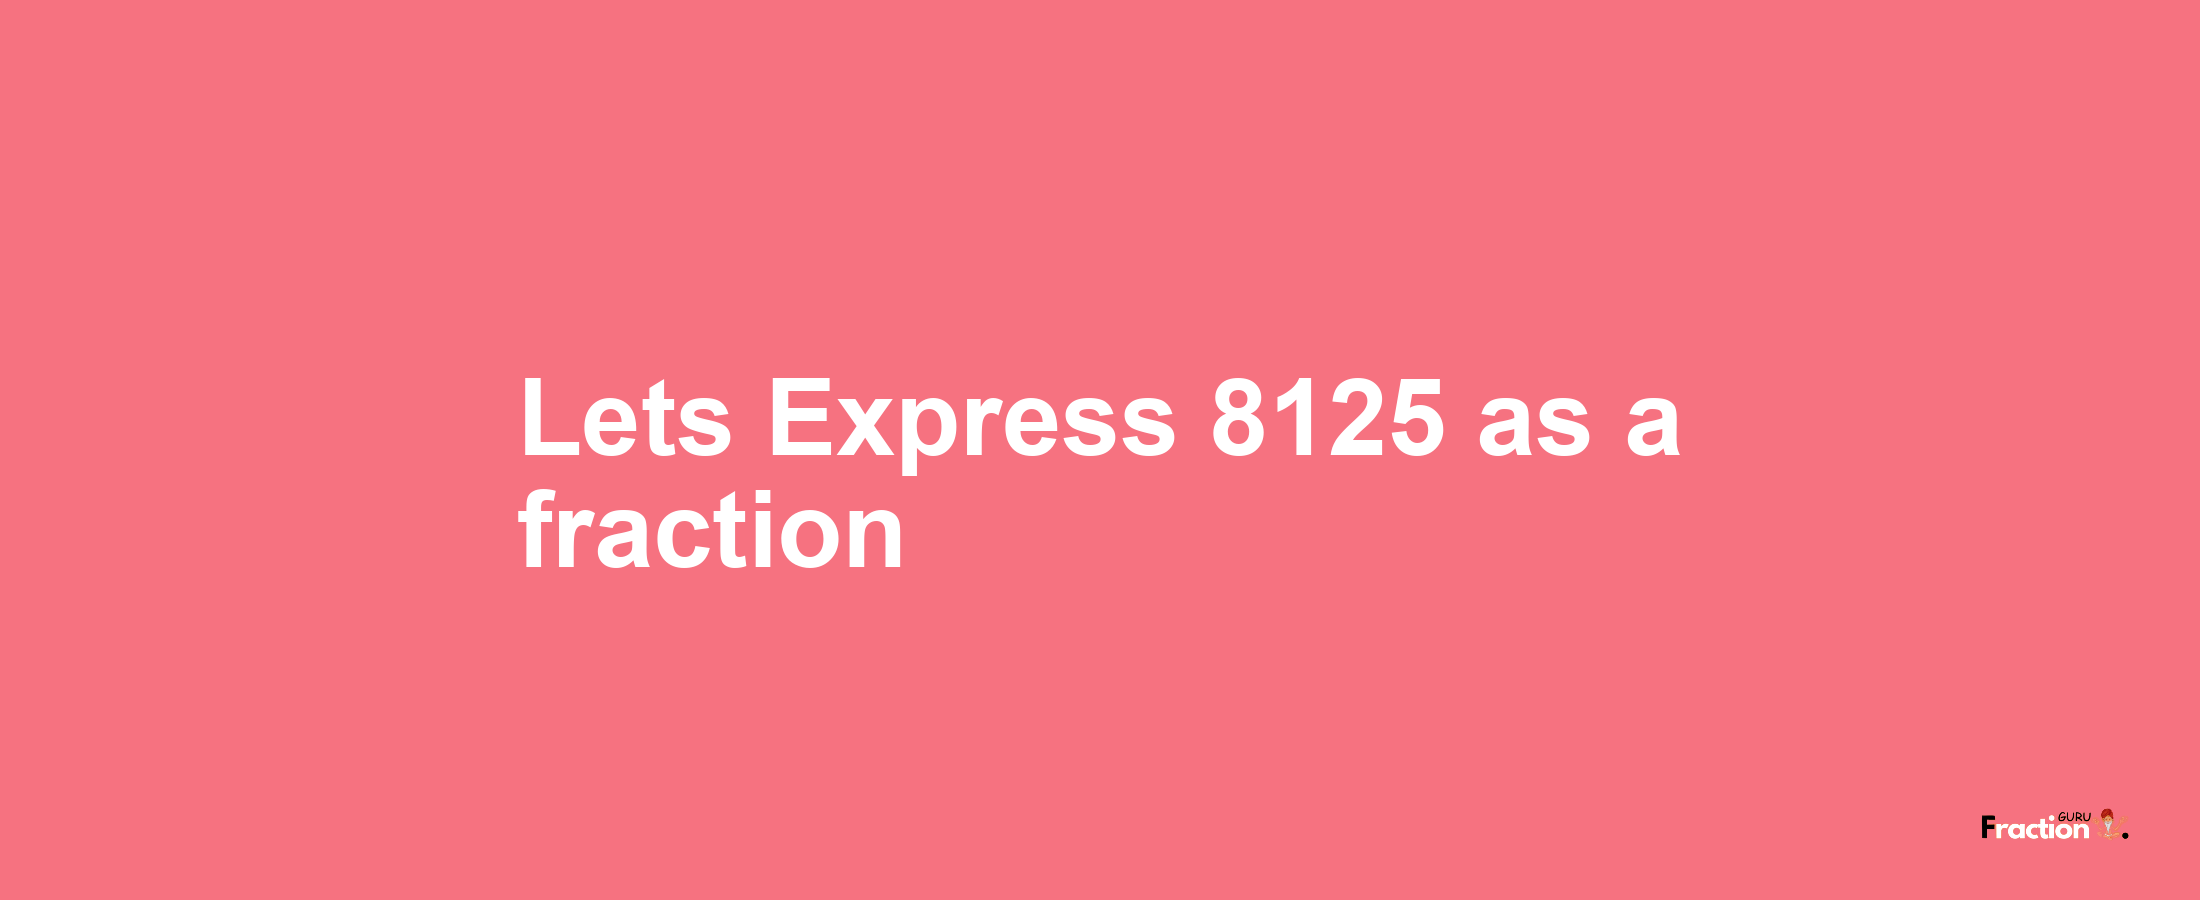 Lets Express 8125 as afraction